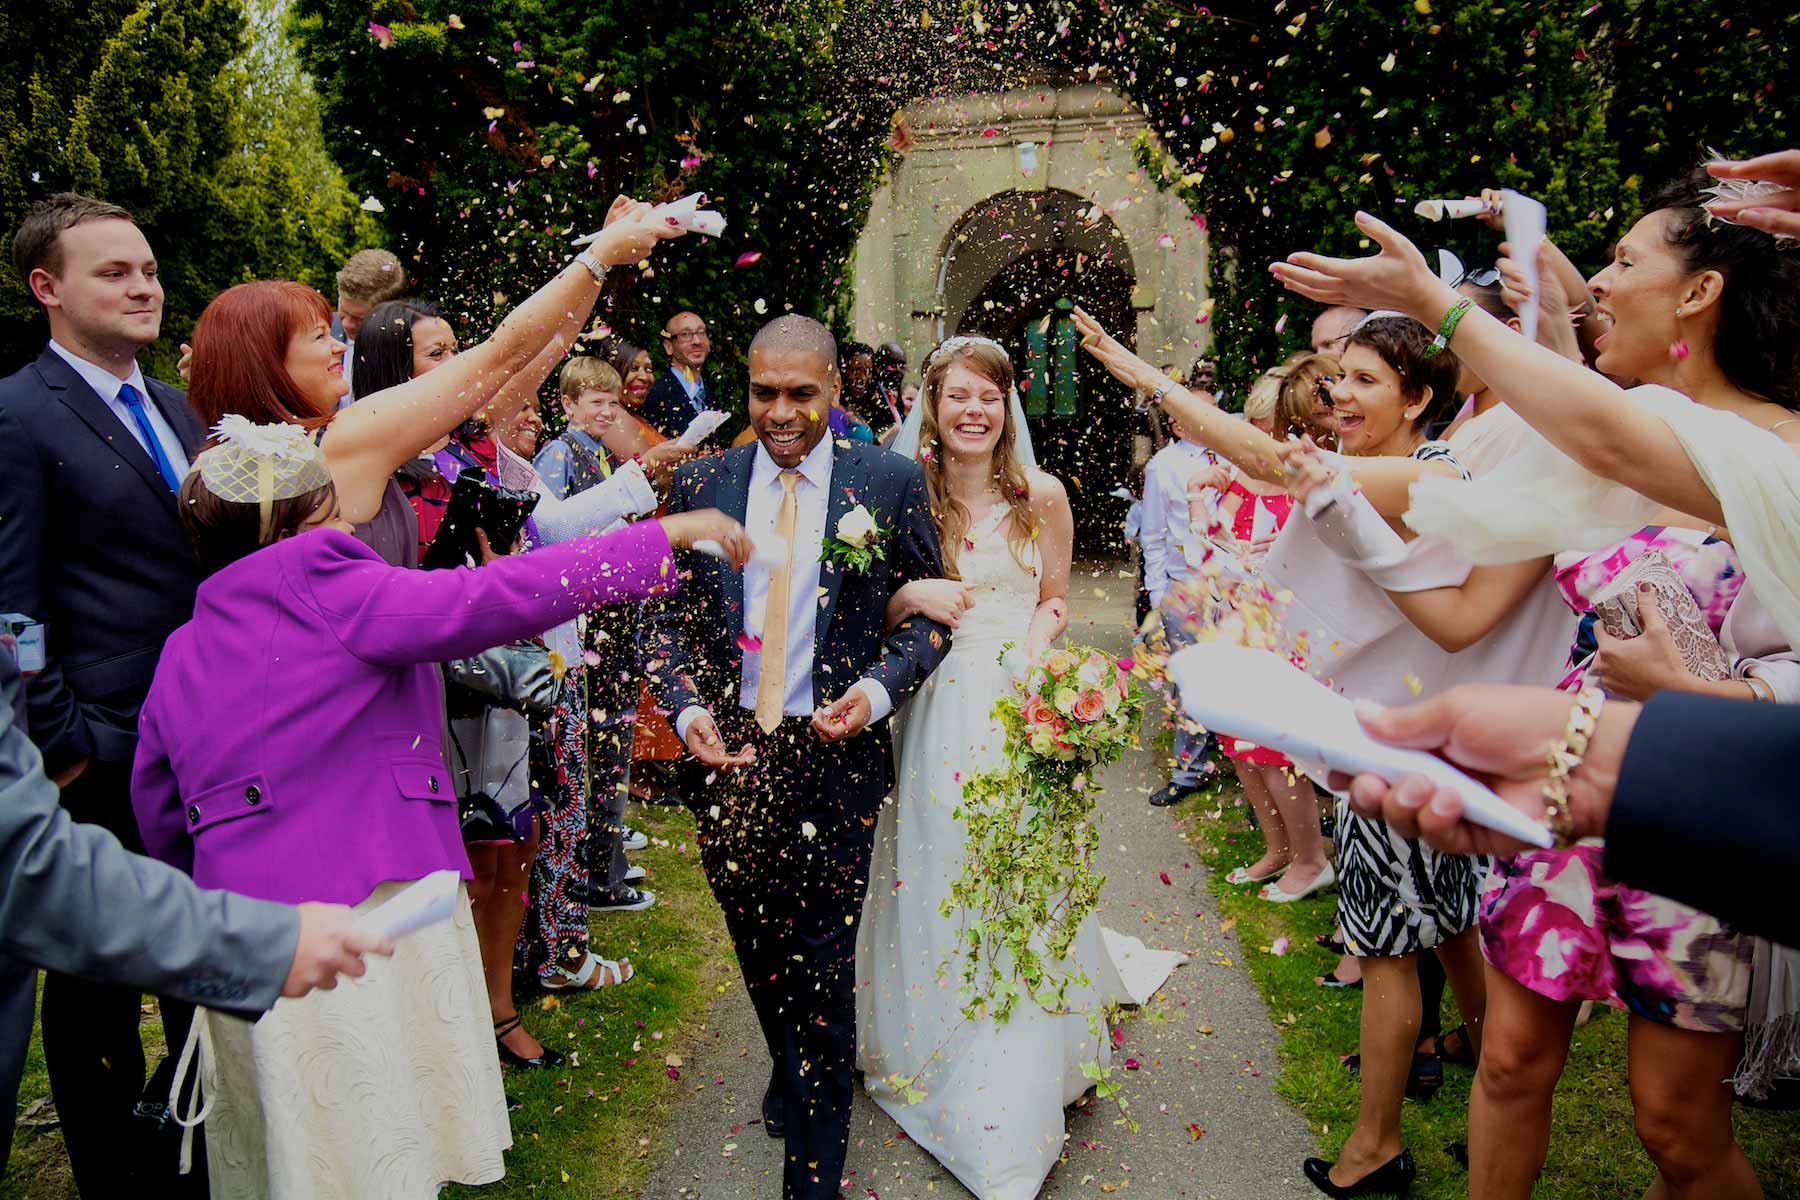 Bright and colourful - best confetti shot ever!